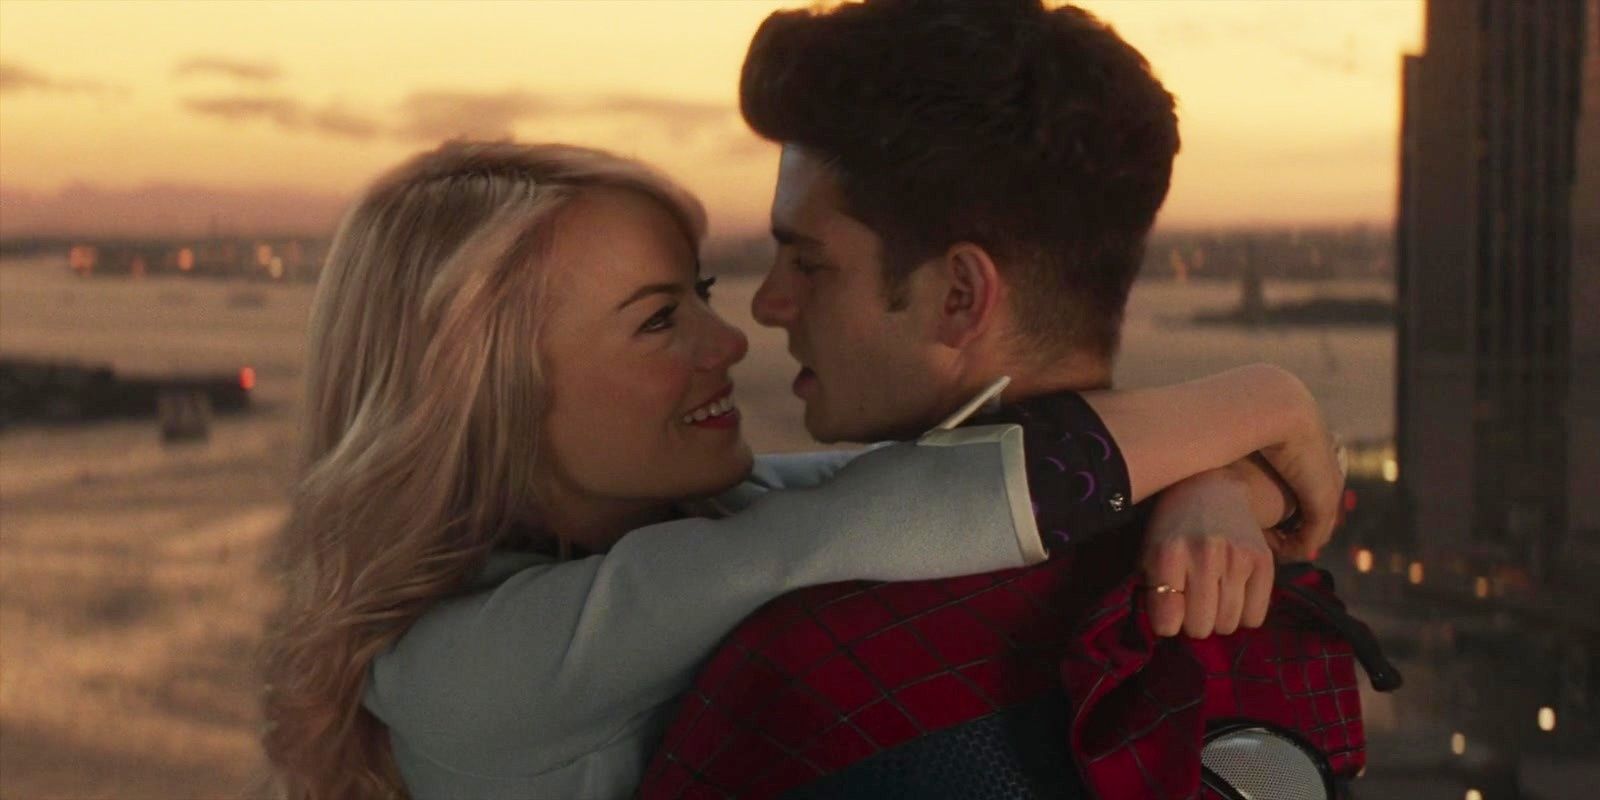 Gwen Stacy with her arms around Peter Parker in The Amazing Spider-Man 2